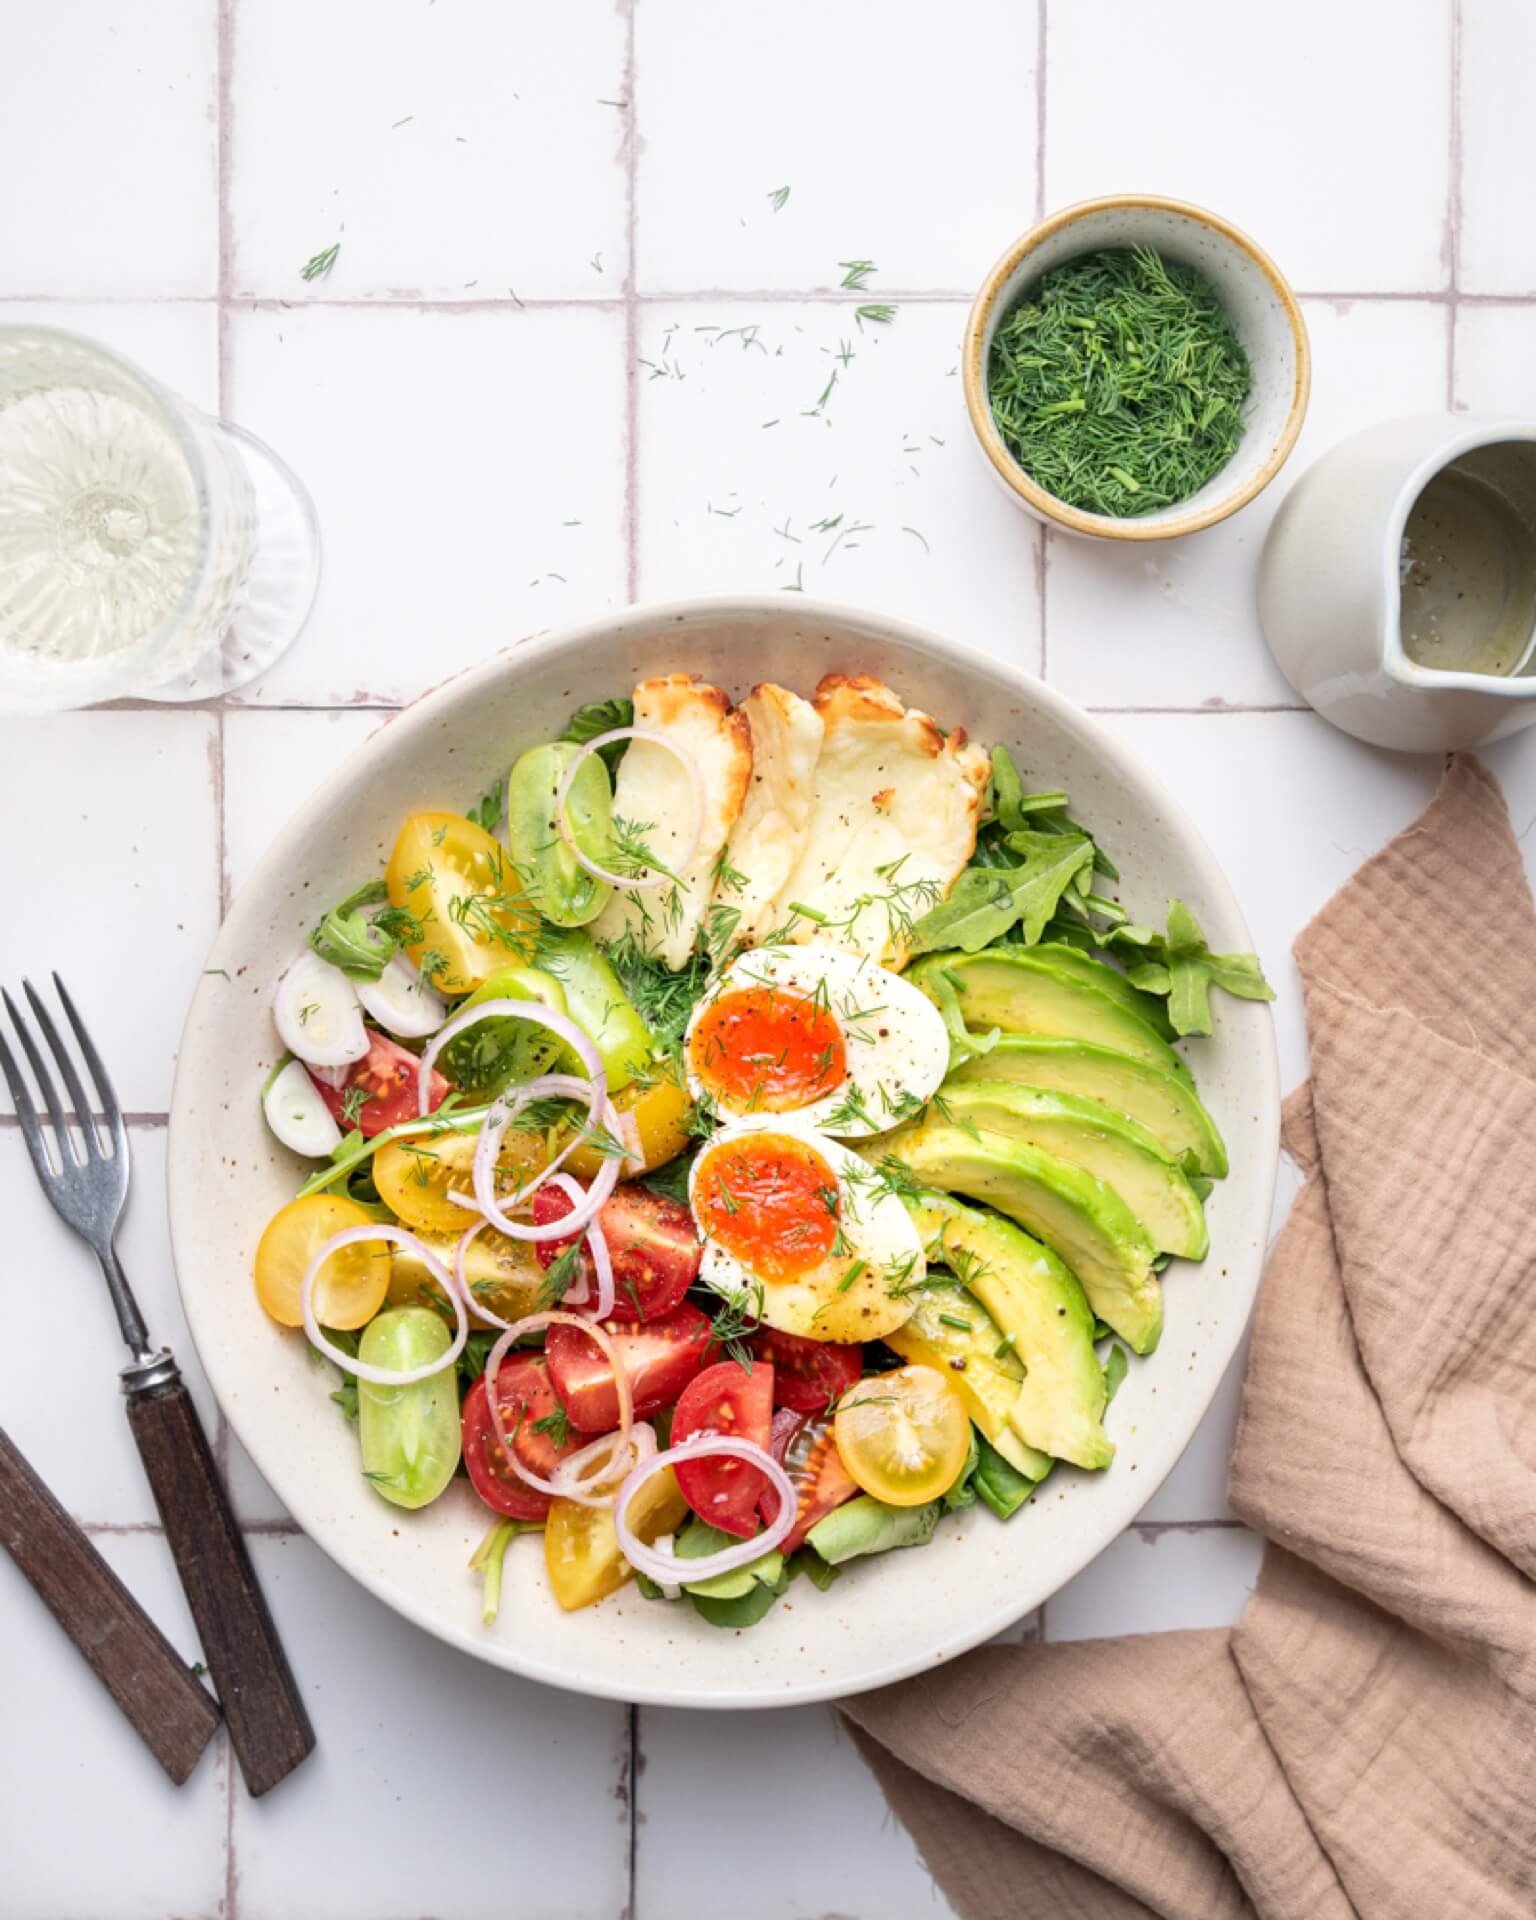 GRILLED HALLOUMI SALAD WITH A BOILED EGG